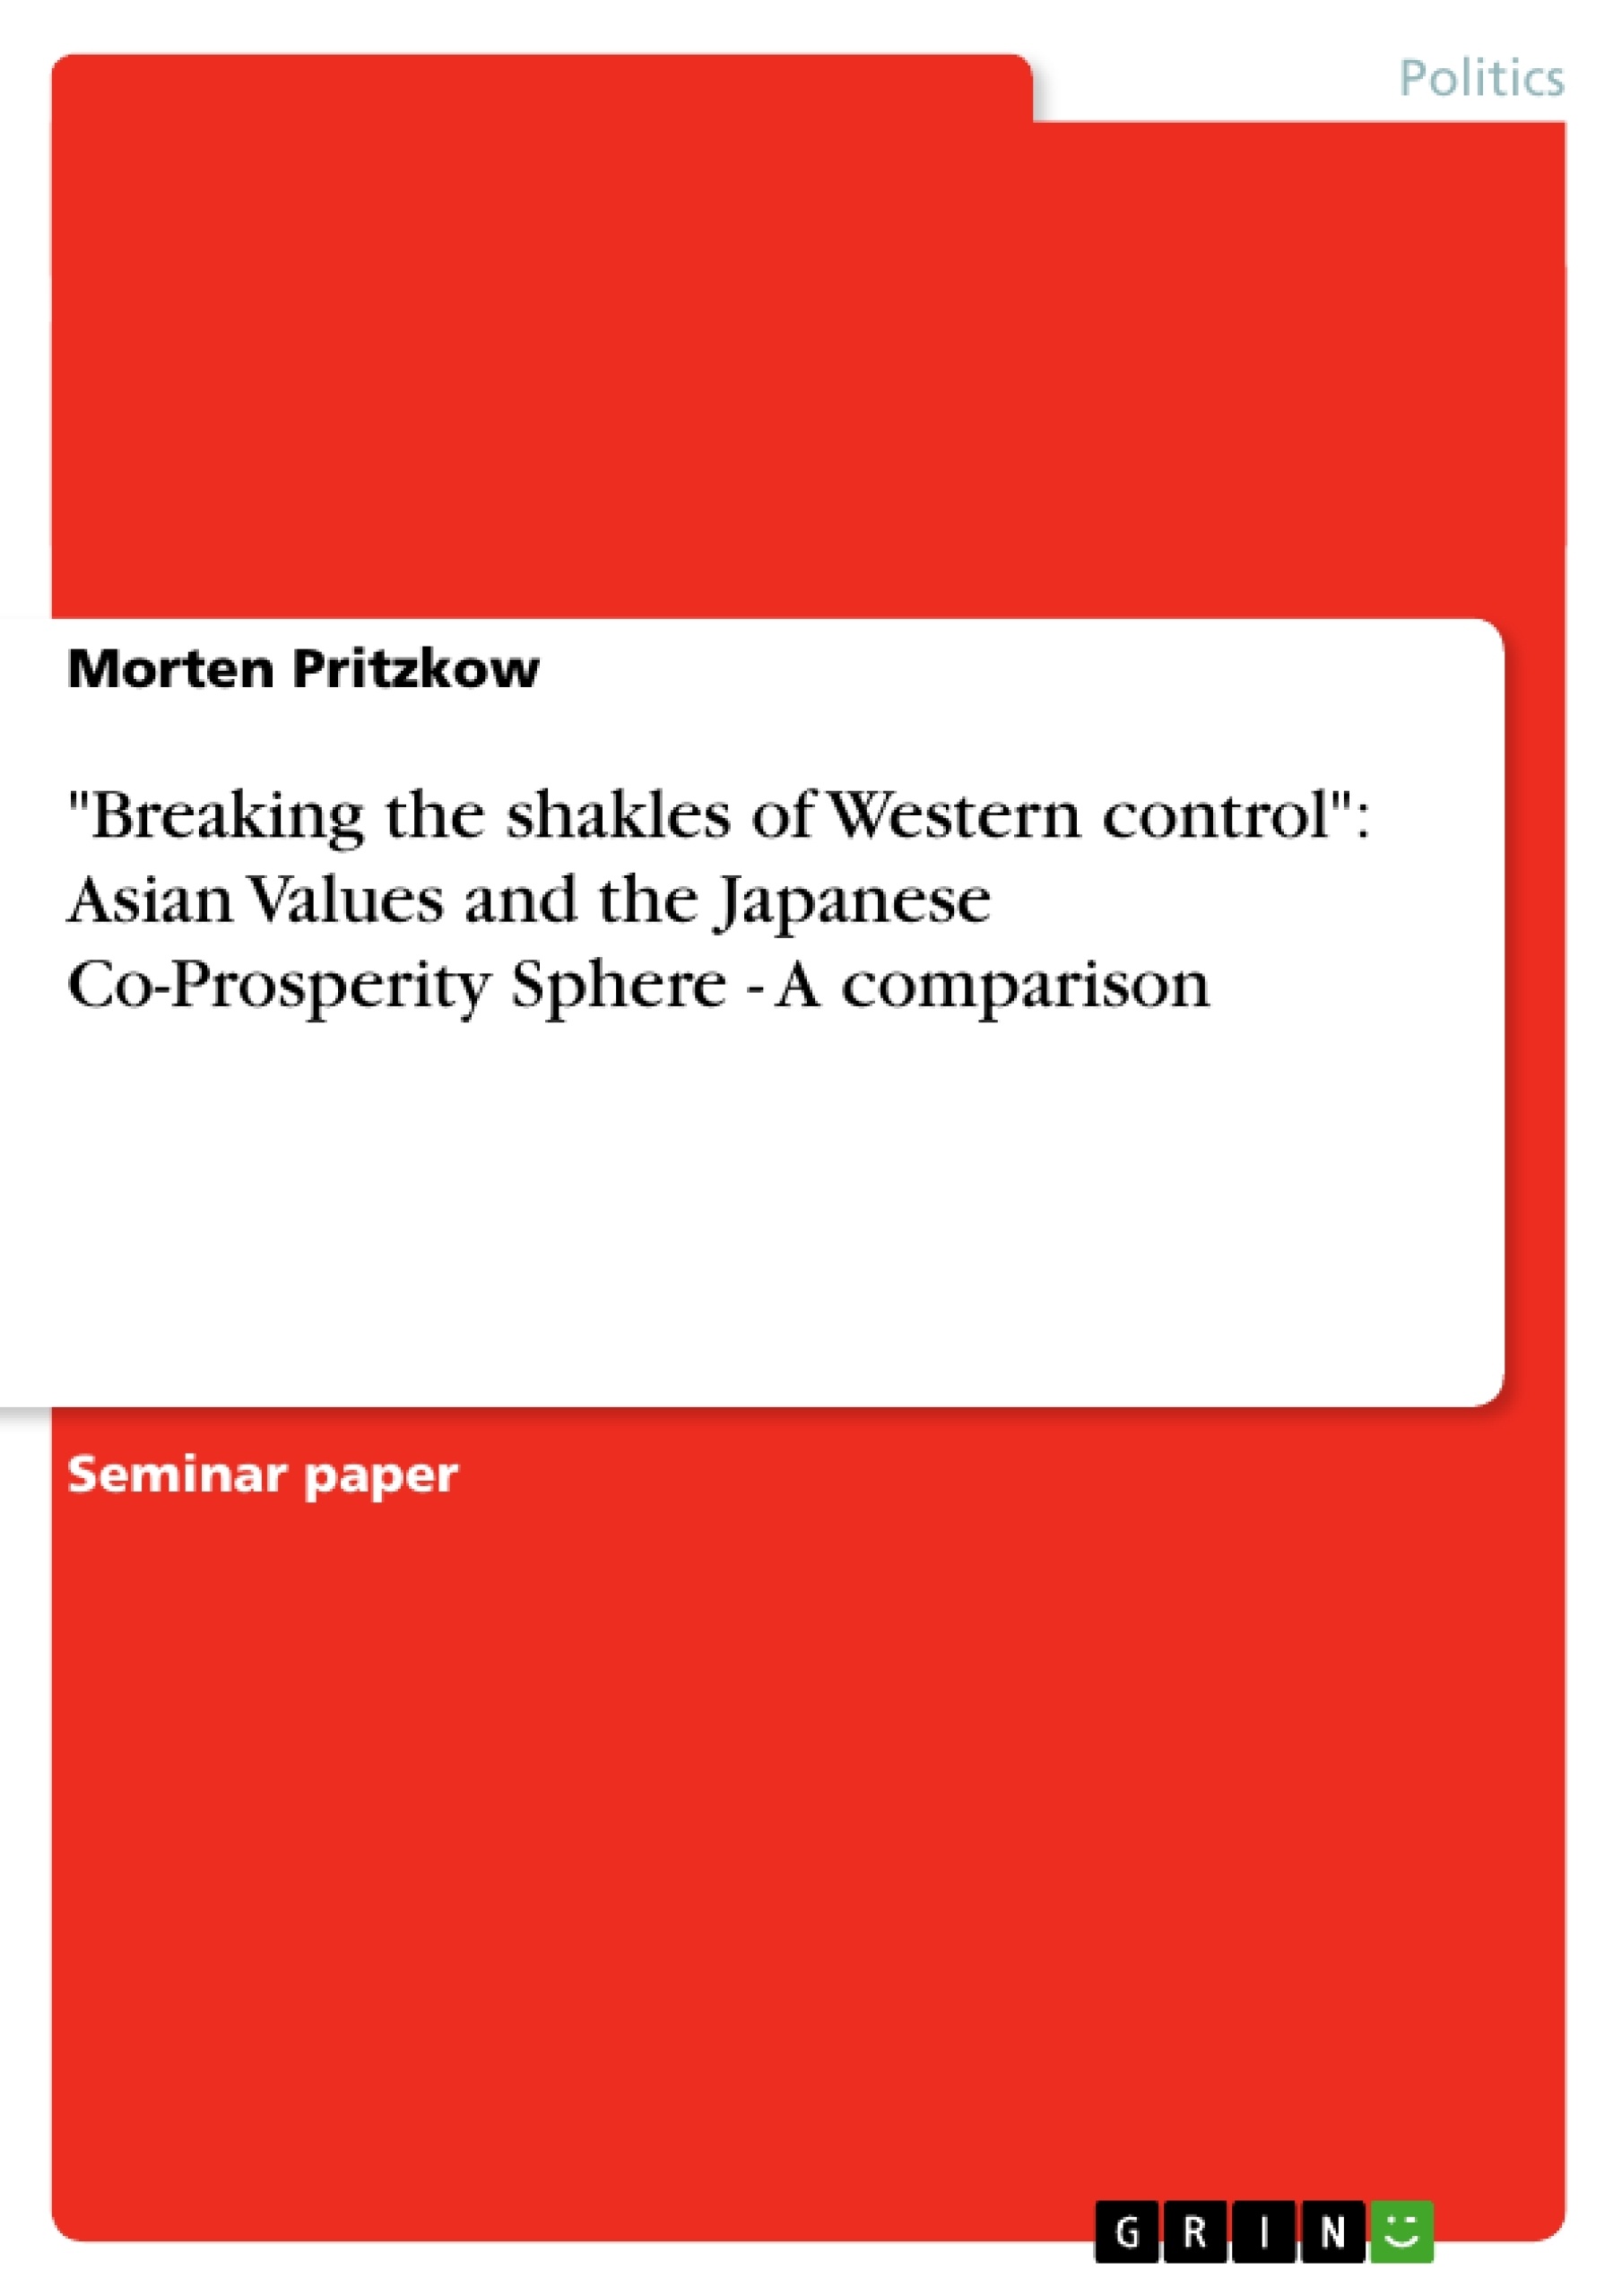 Title: "Breaking the shakles of Western control": Asian Values and the Japanese Co-Prosperity Sphere - A comparison